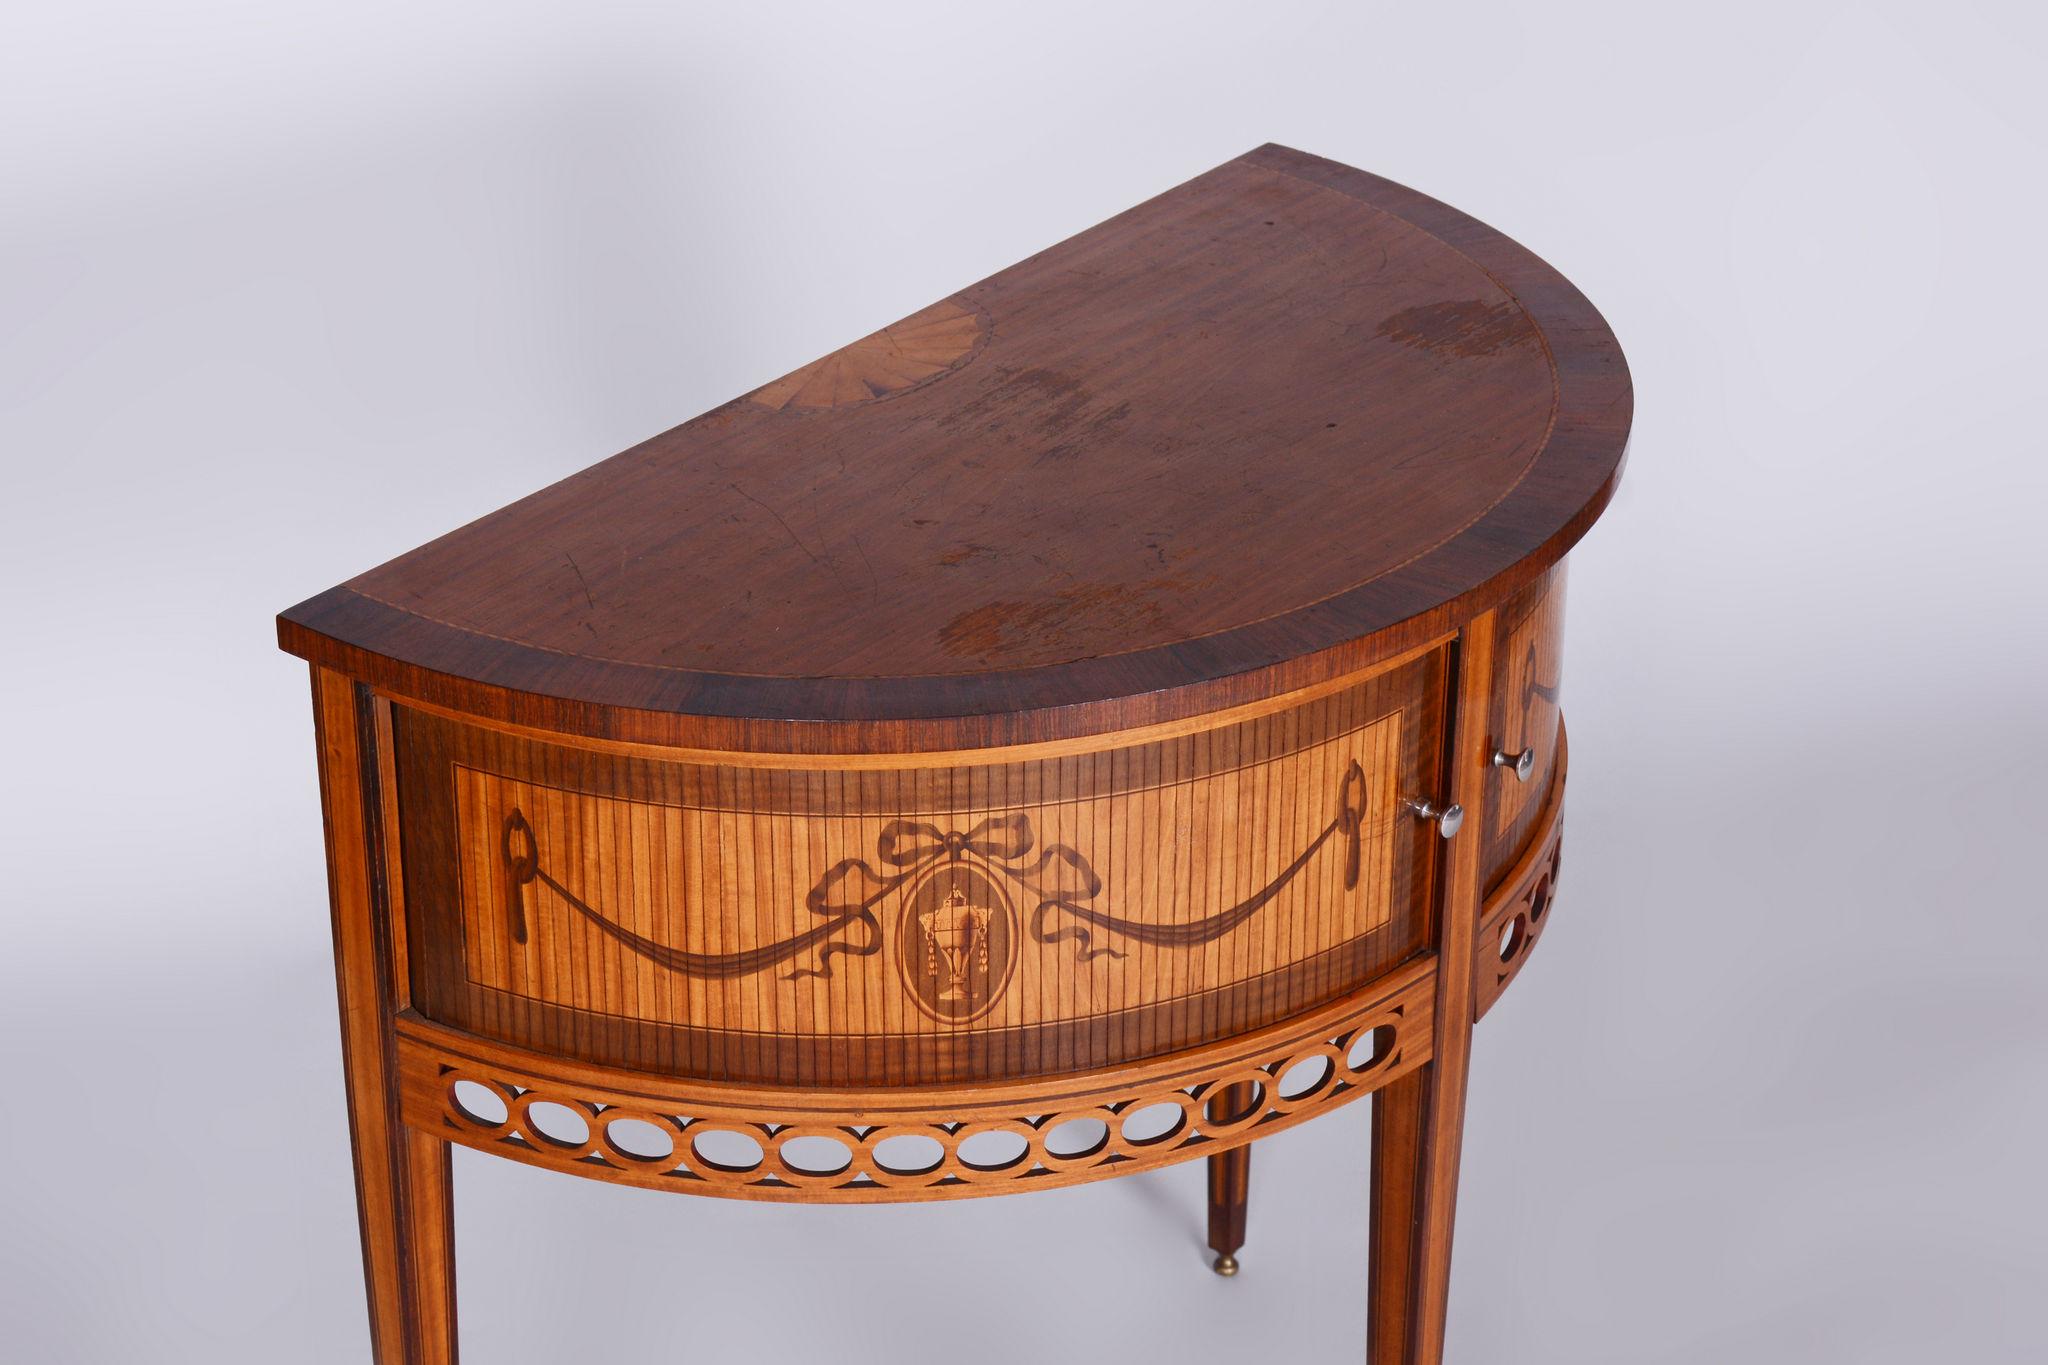 Restored Biedermeier Side Table, Walnut, Maple, Unique Marquetry, France, 1850s For Sale 2